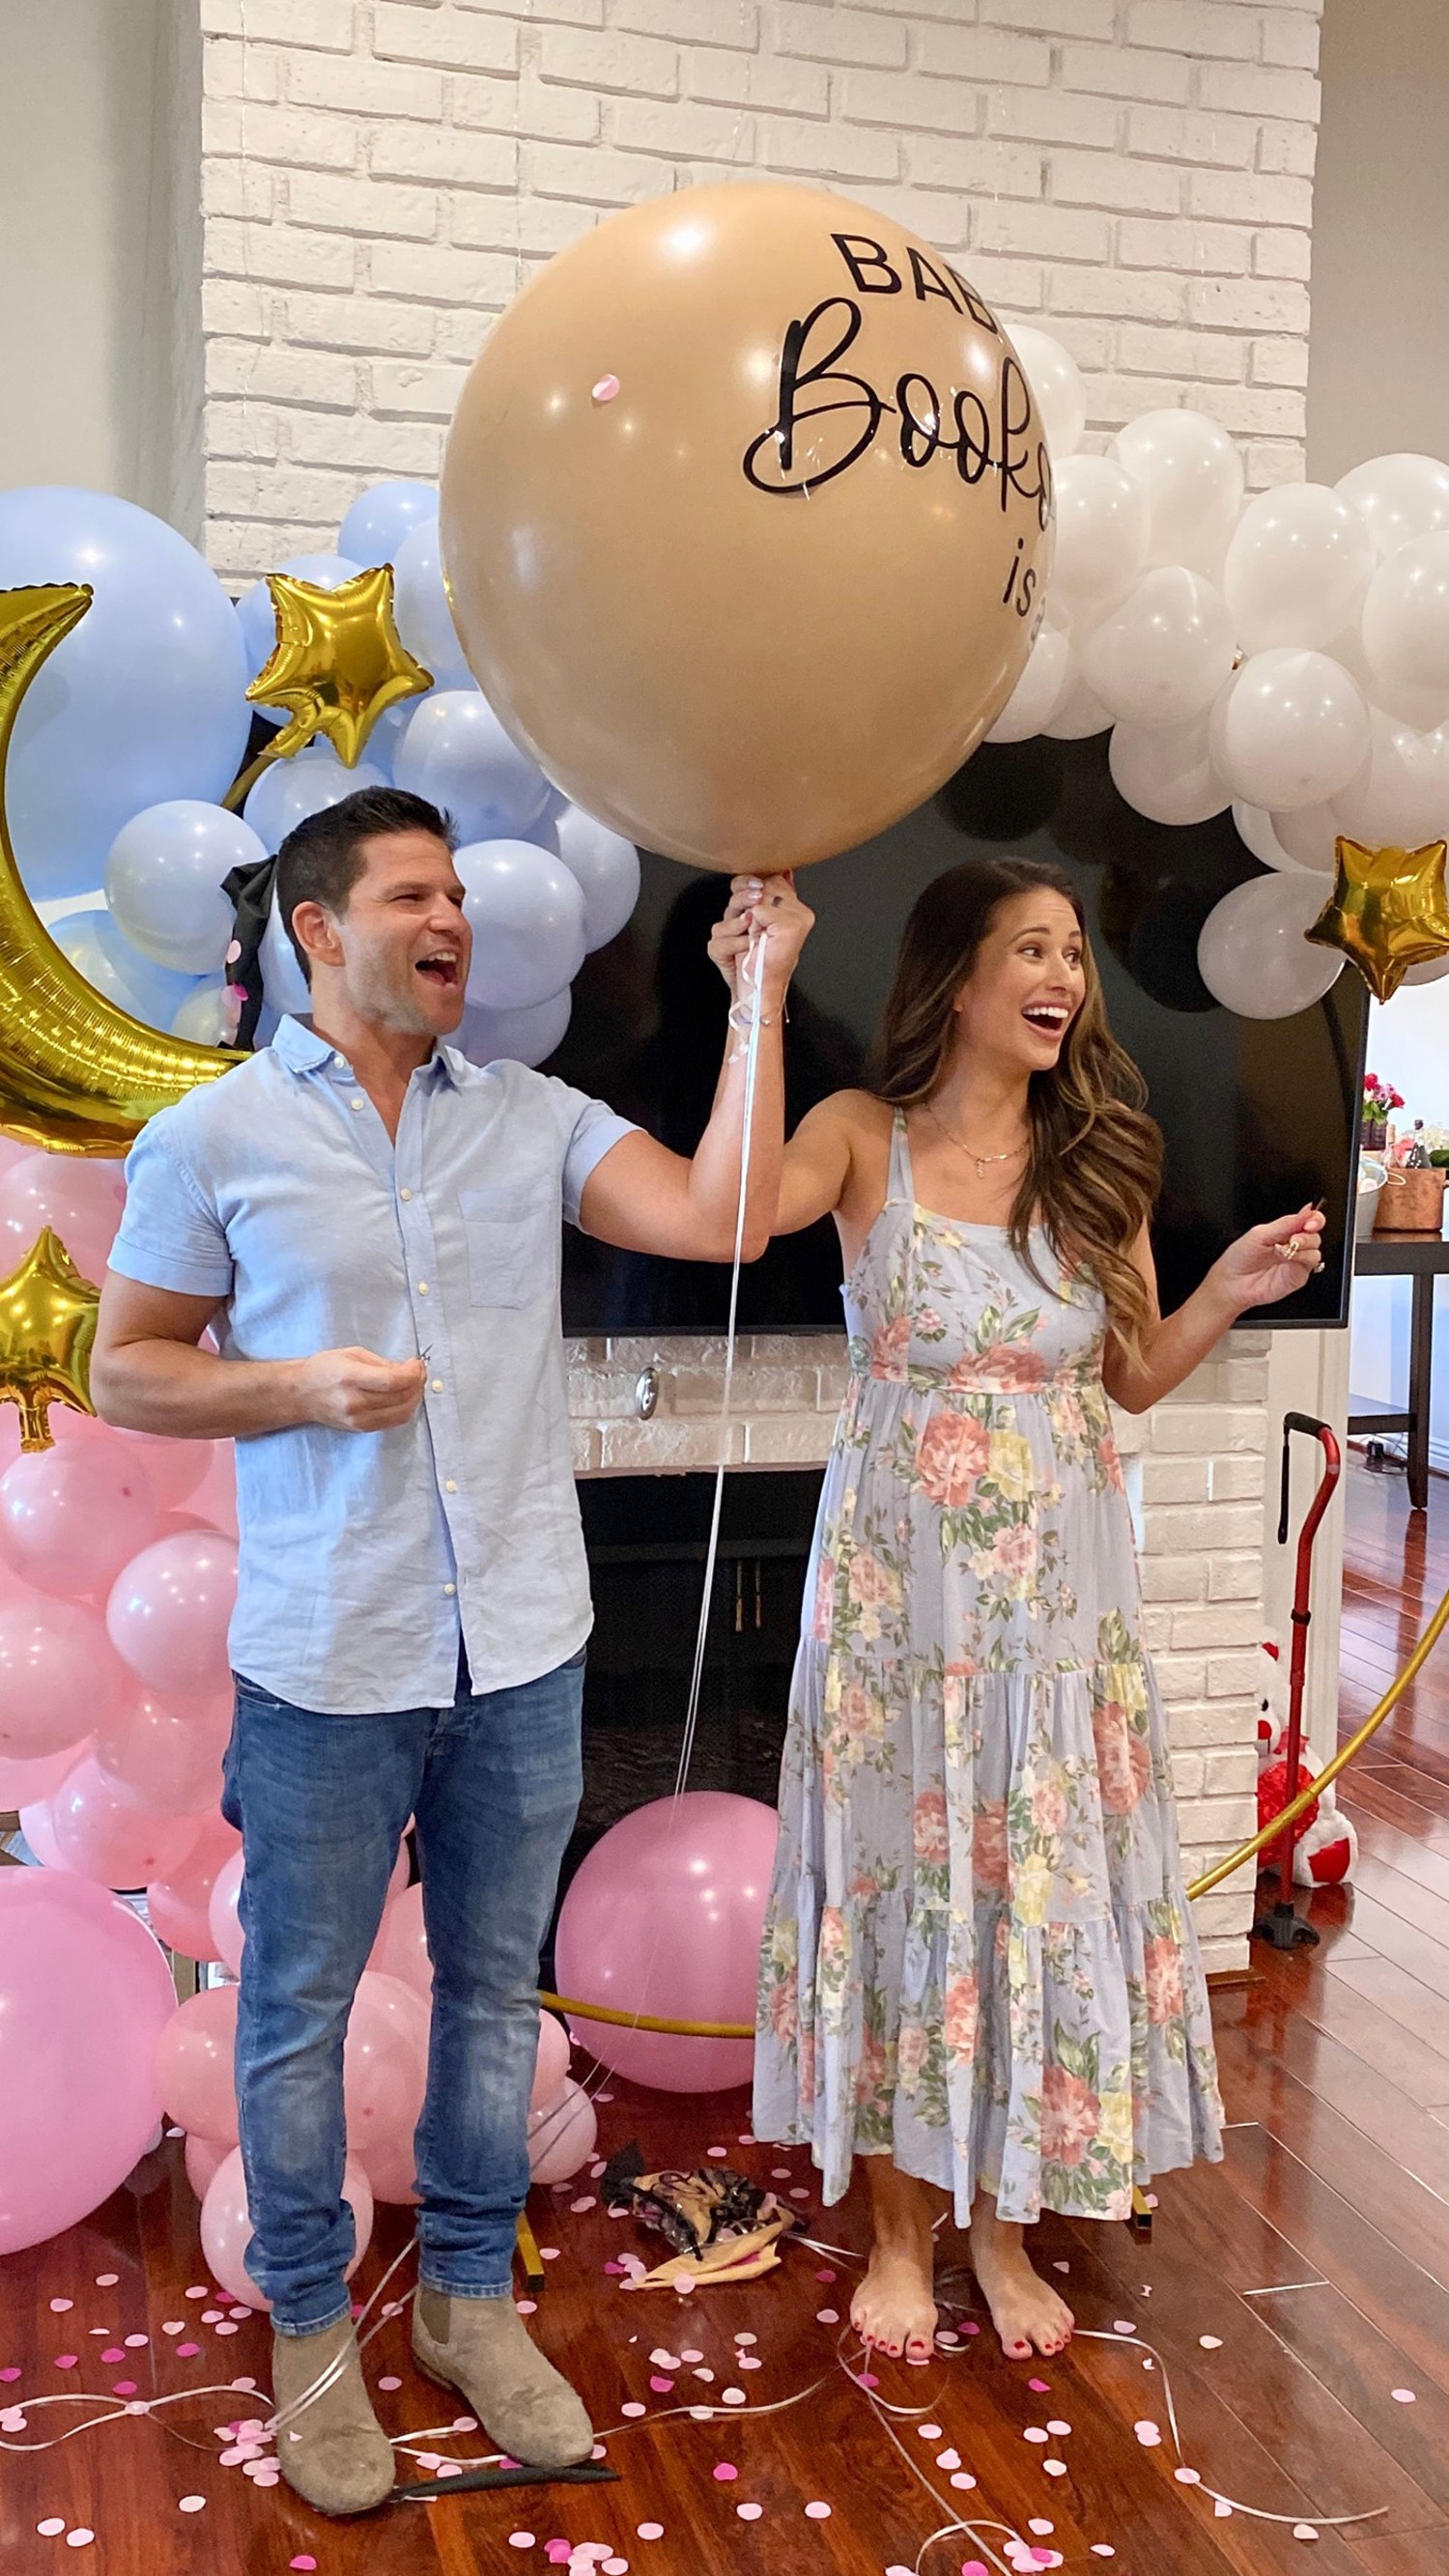 Former Miss USA Shocks Family With Good News At Gender Reveal